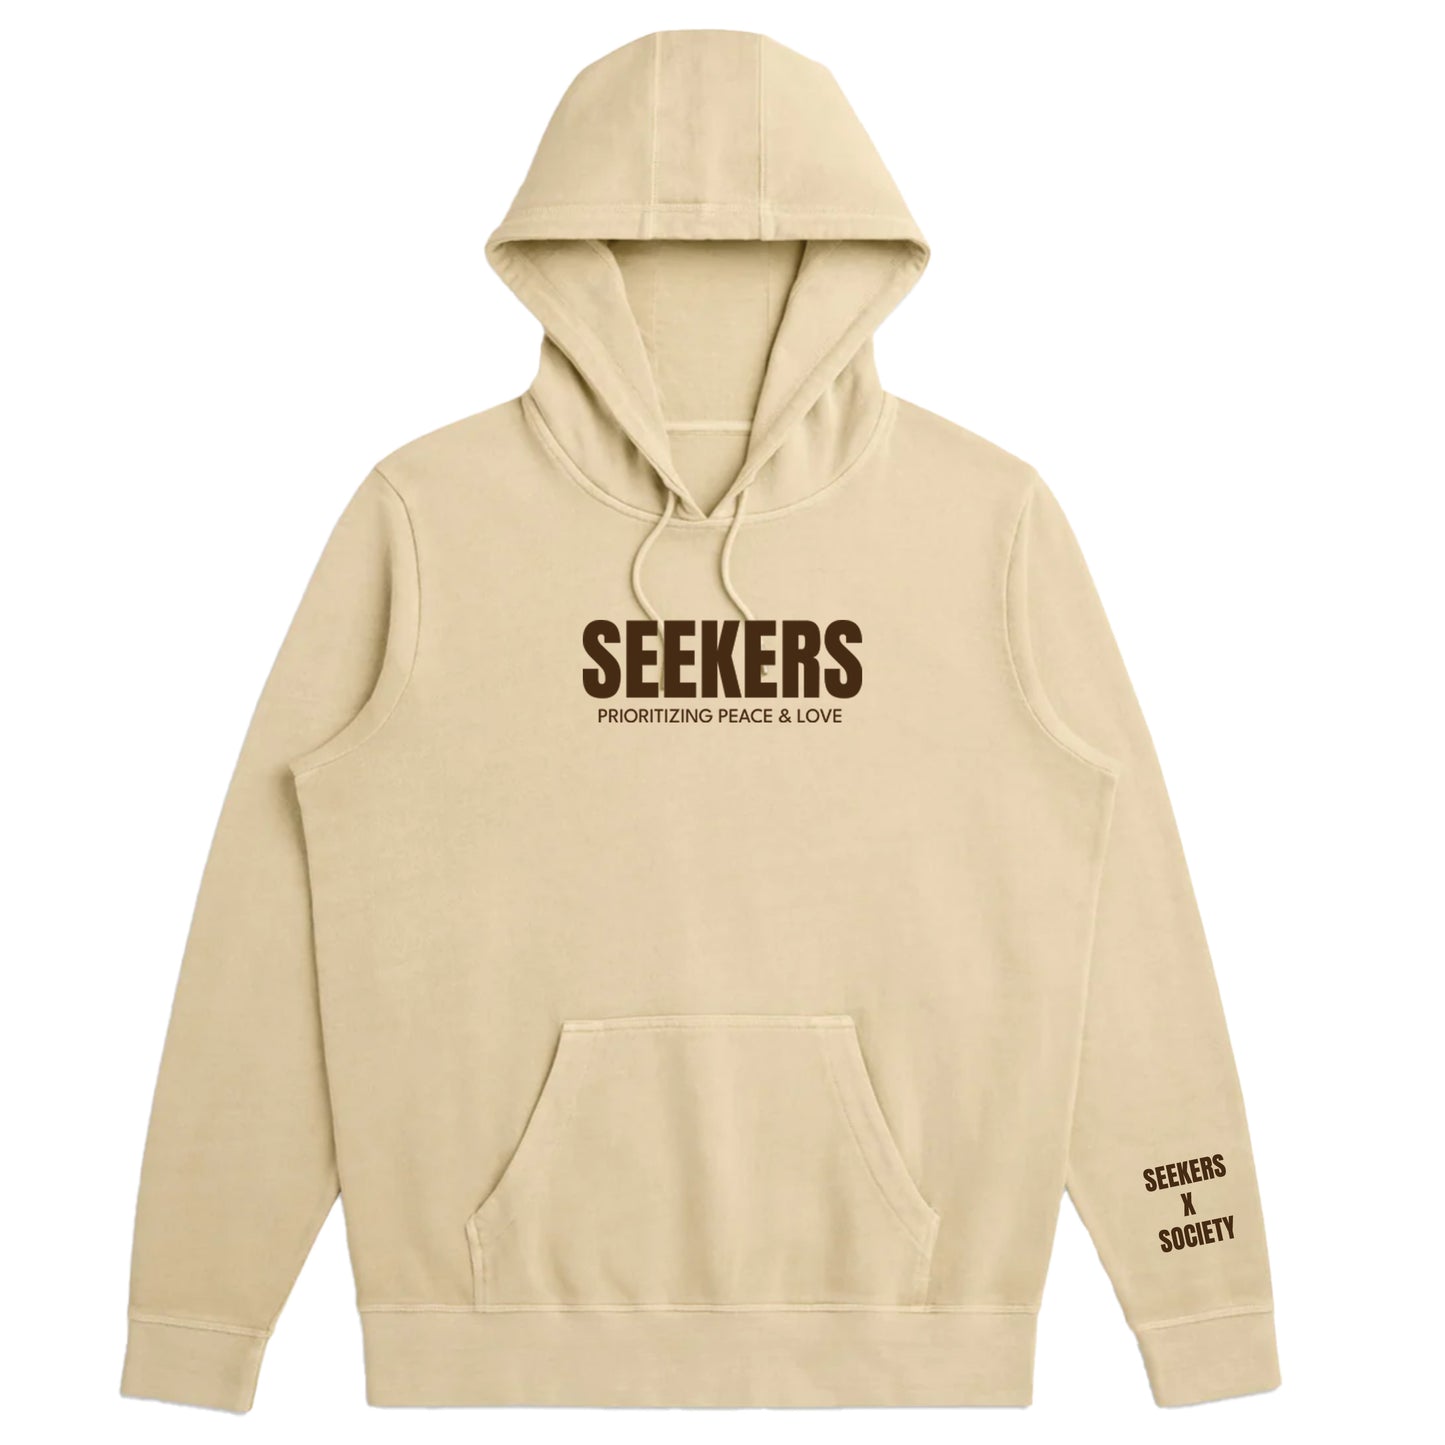 Seeker's Limited Edition Jogger Set